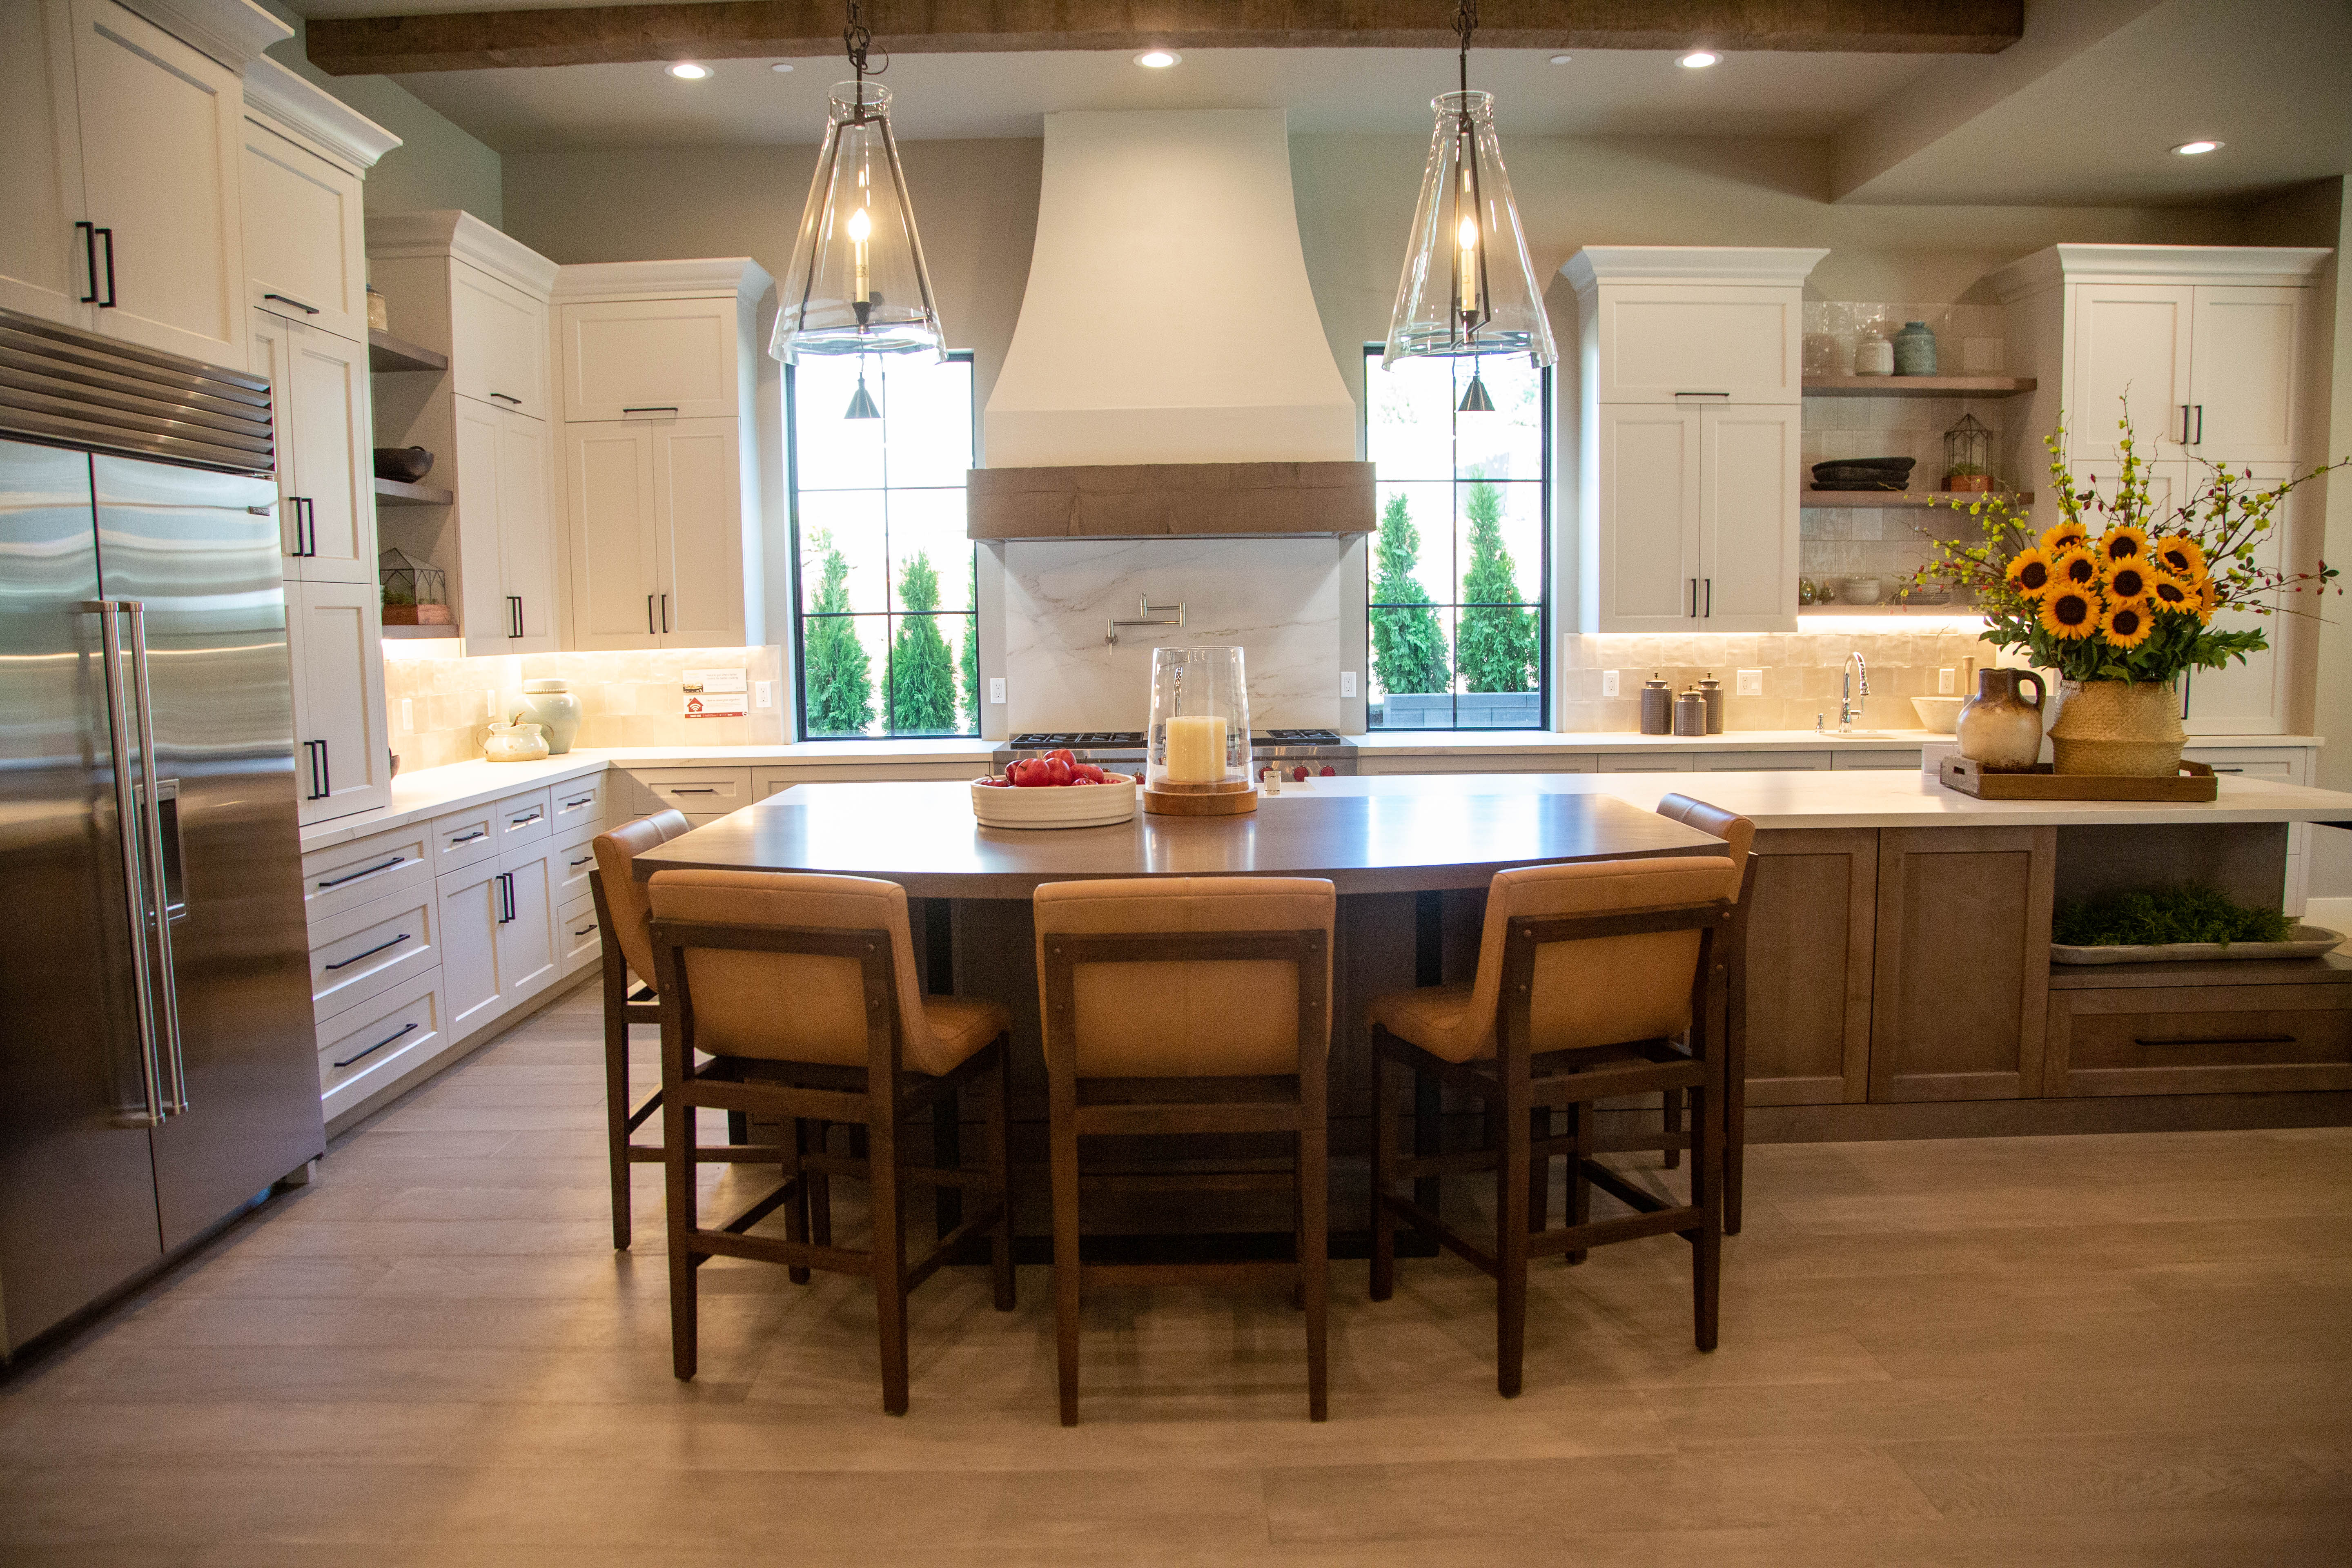 20 kitchen trends Find popular Houzz colors, cabinets ...